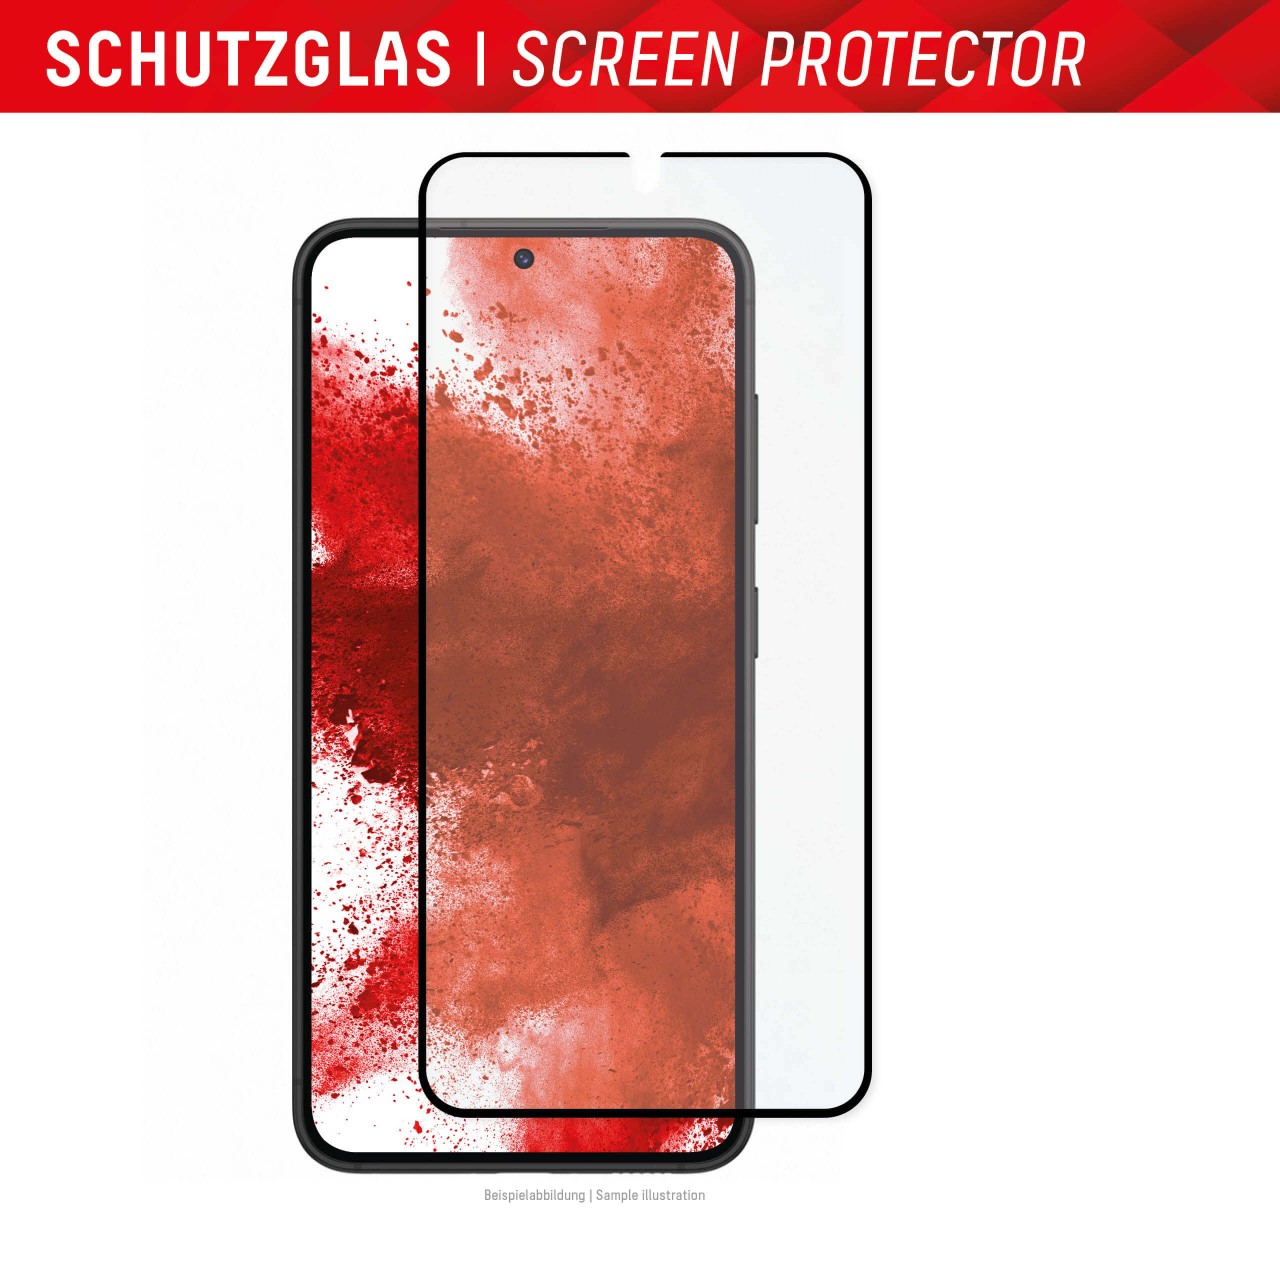 Samsung Galaxy S22/S23 PRO-TOUCH GLASS ECO